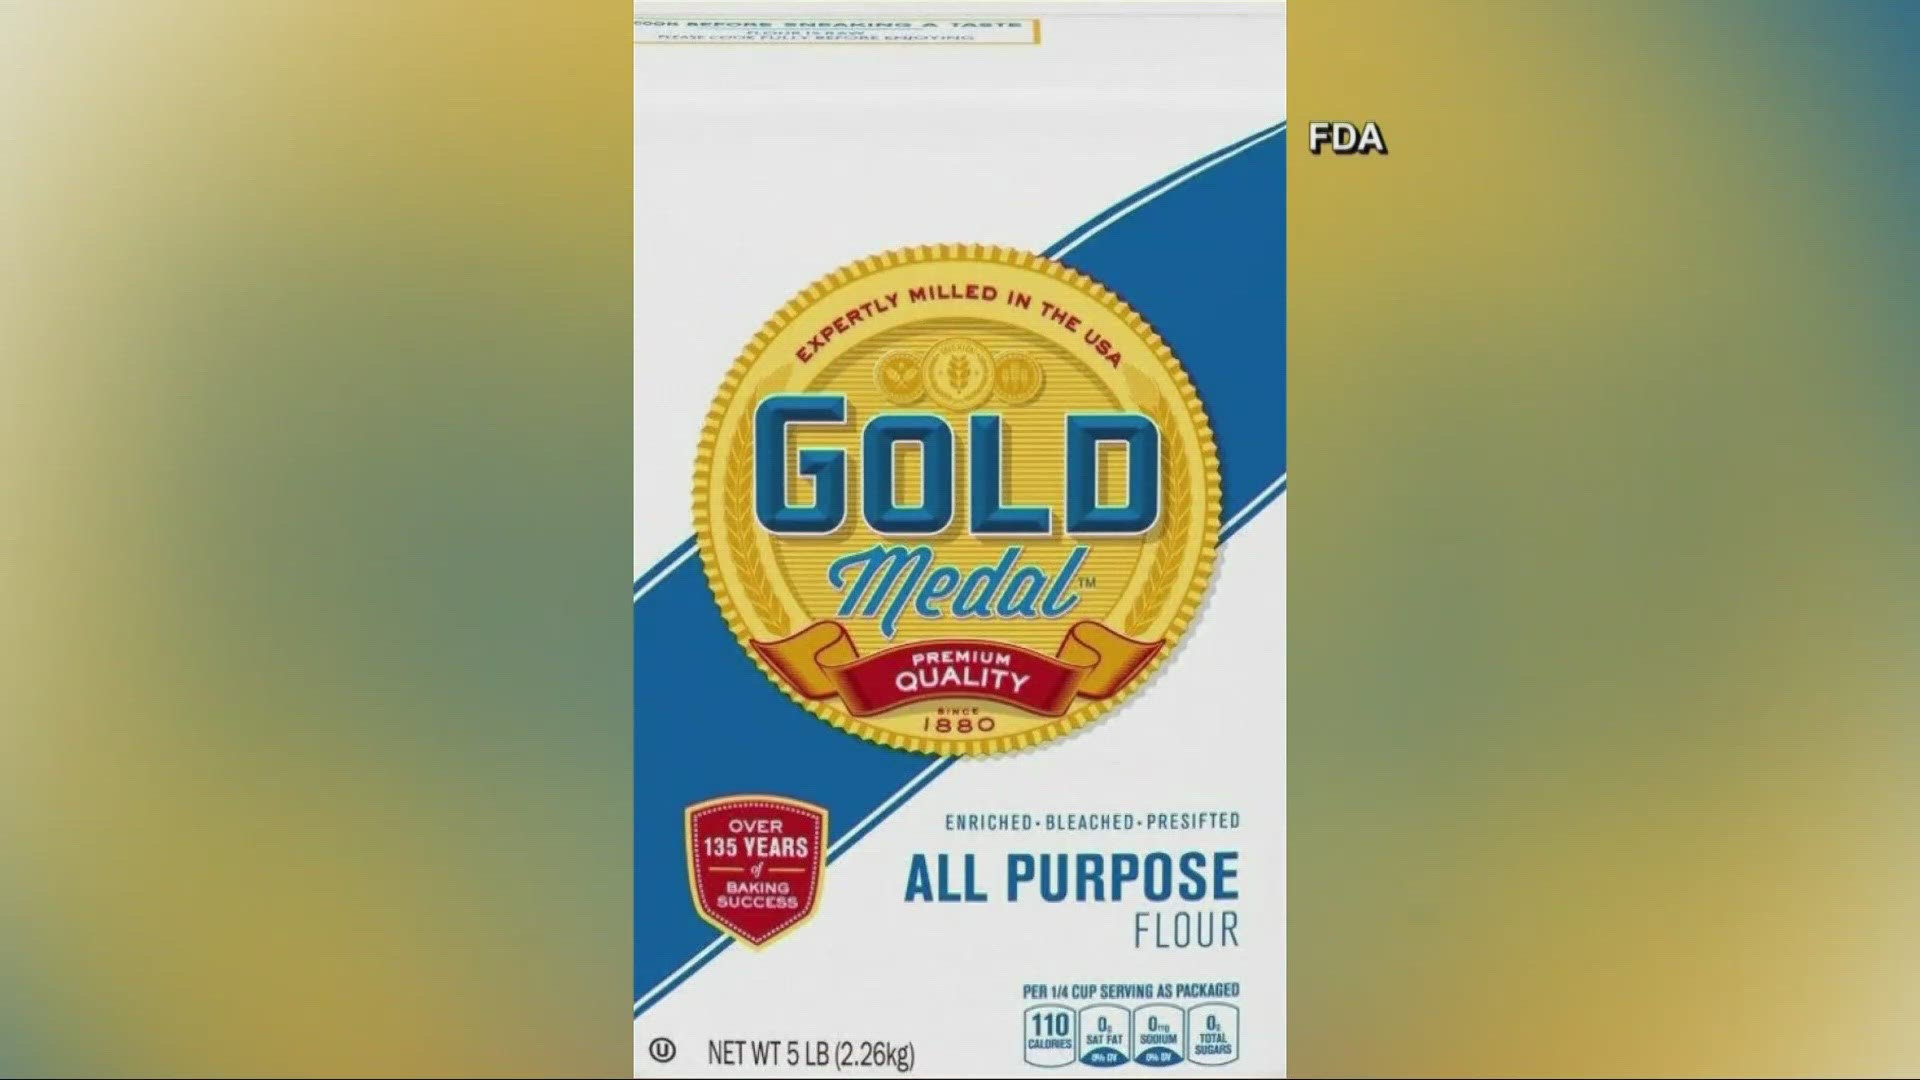 General Mills is encouraging customers to check their pantries amid the recall.